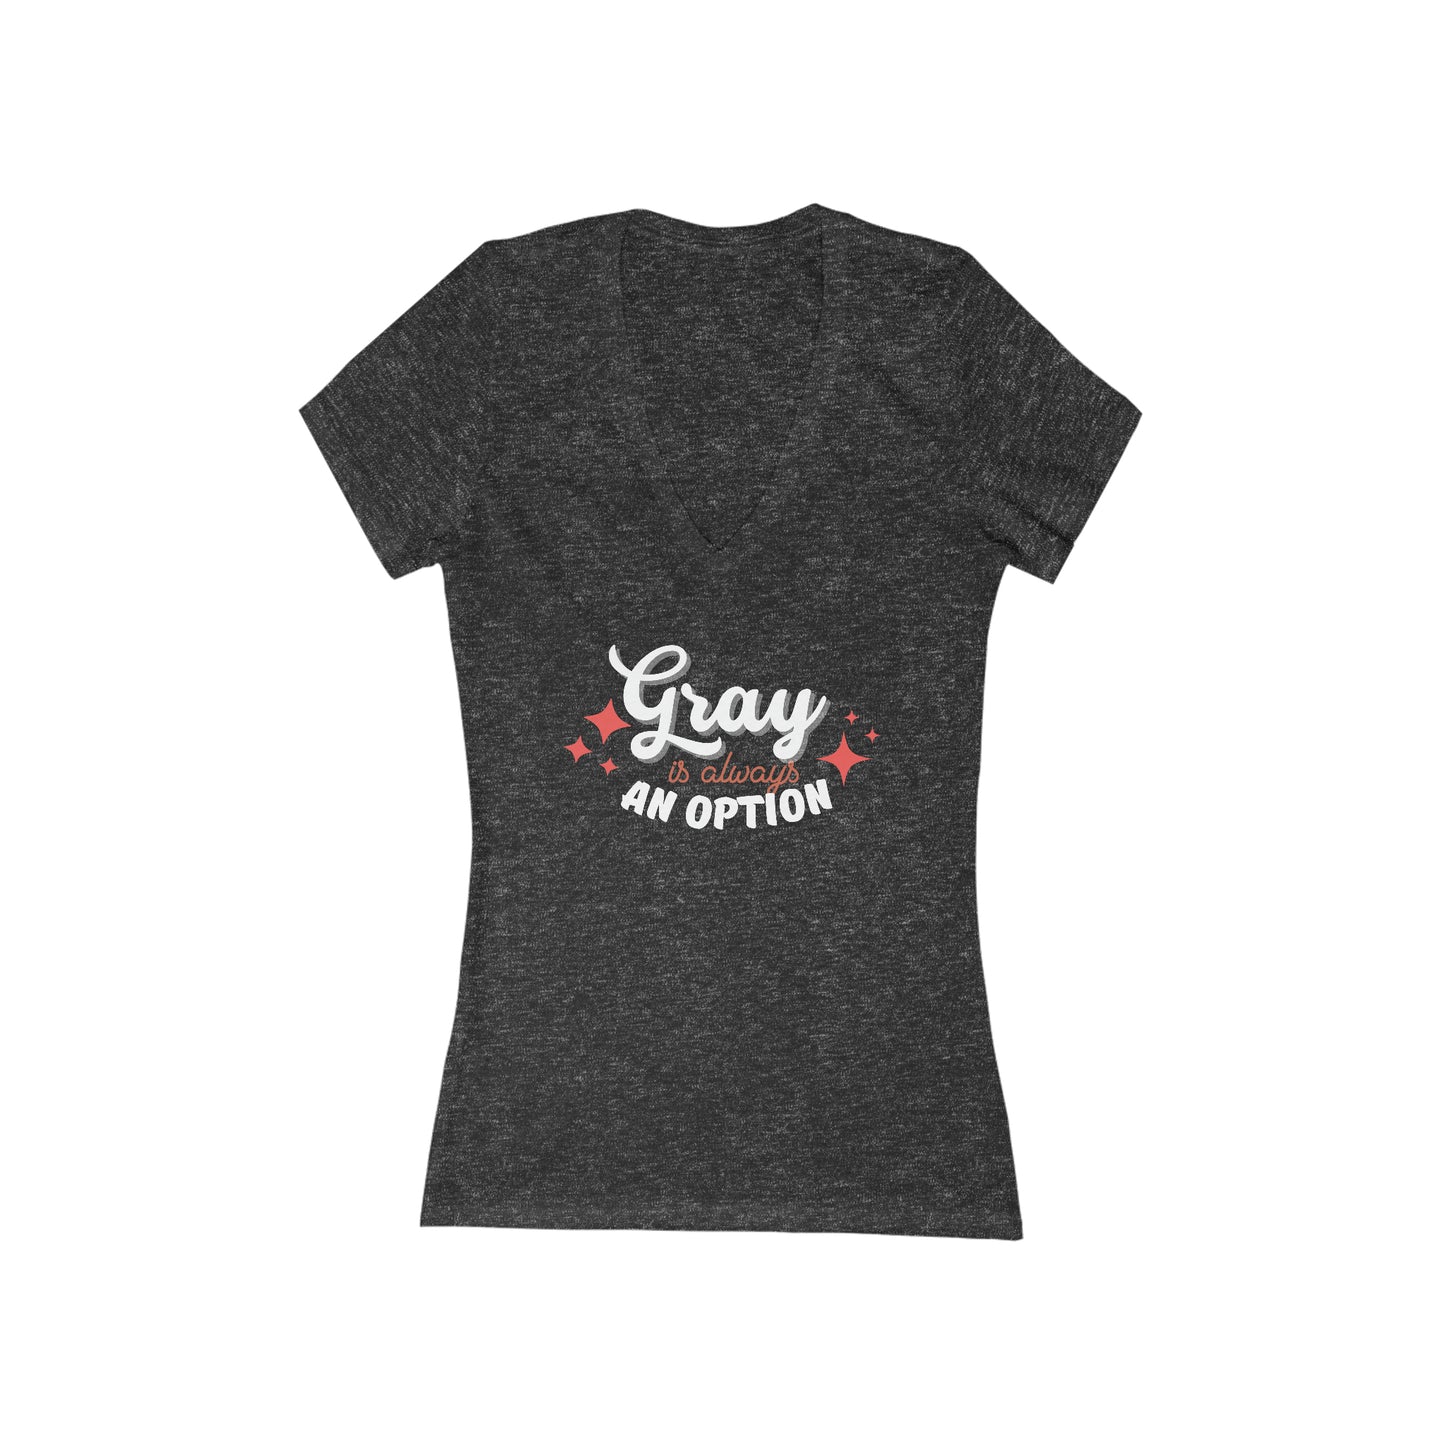 Gray is Always an Option COLOR, short sleeve deep v-neck t-shirt, for women embracing silver and gray hair